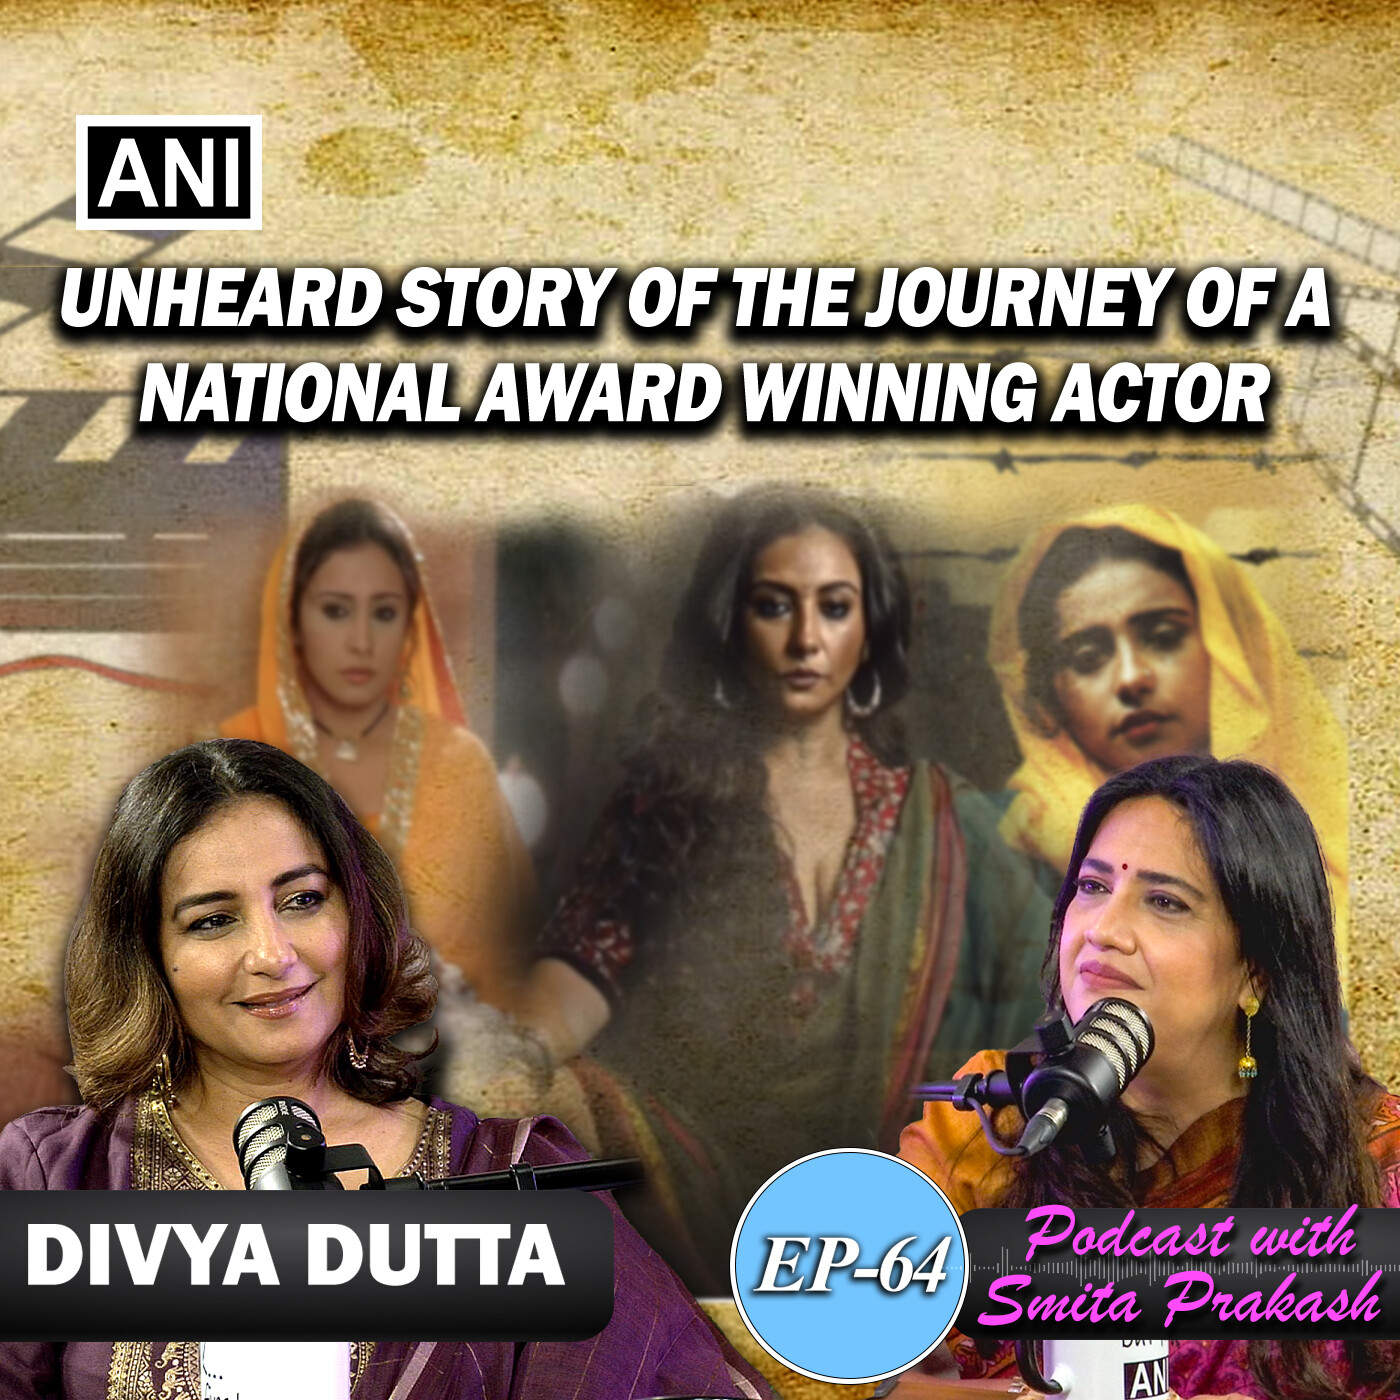 Episode 64 - Actor Divya Dutta unplugged - Stories from Veer Zara and her other hits